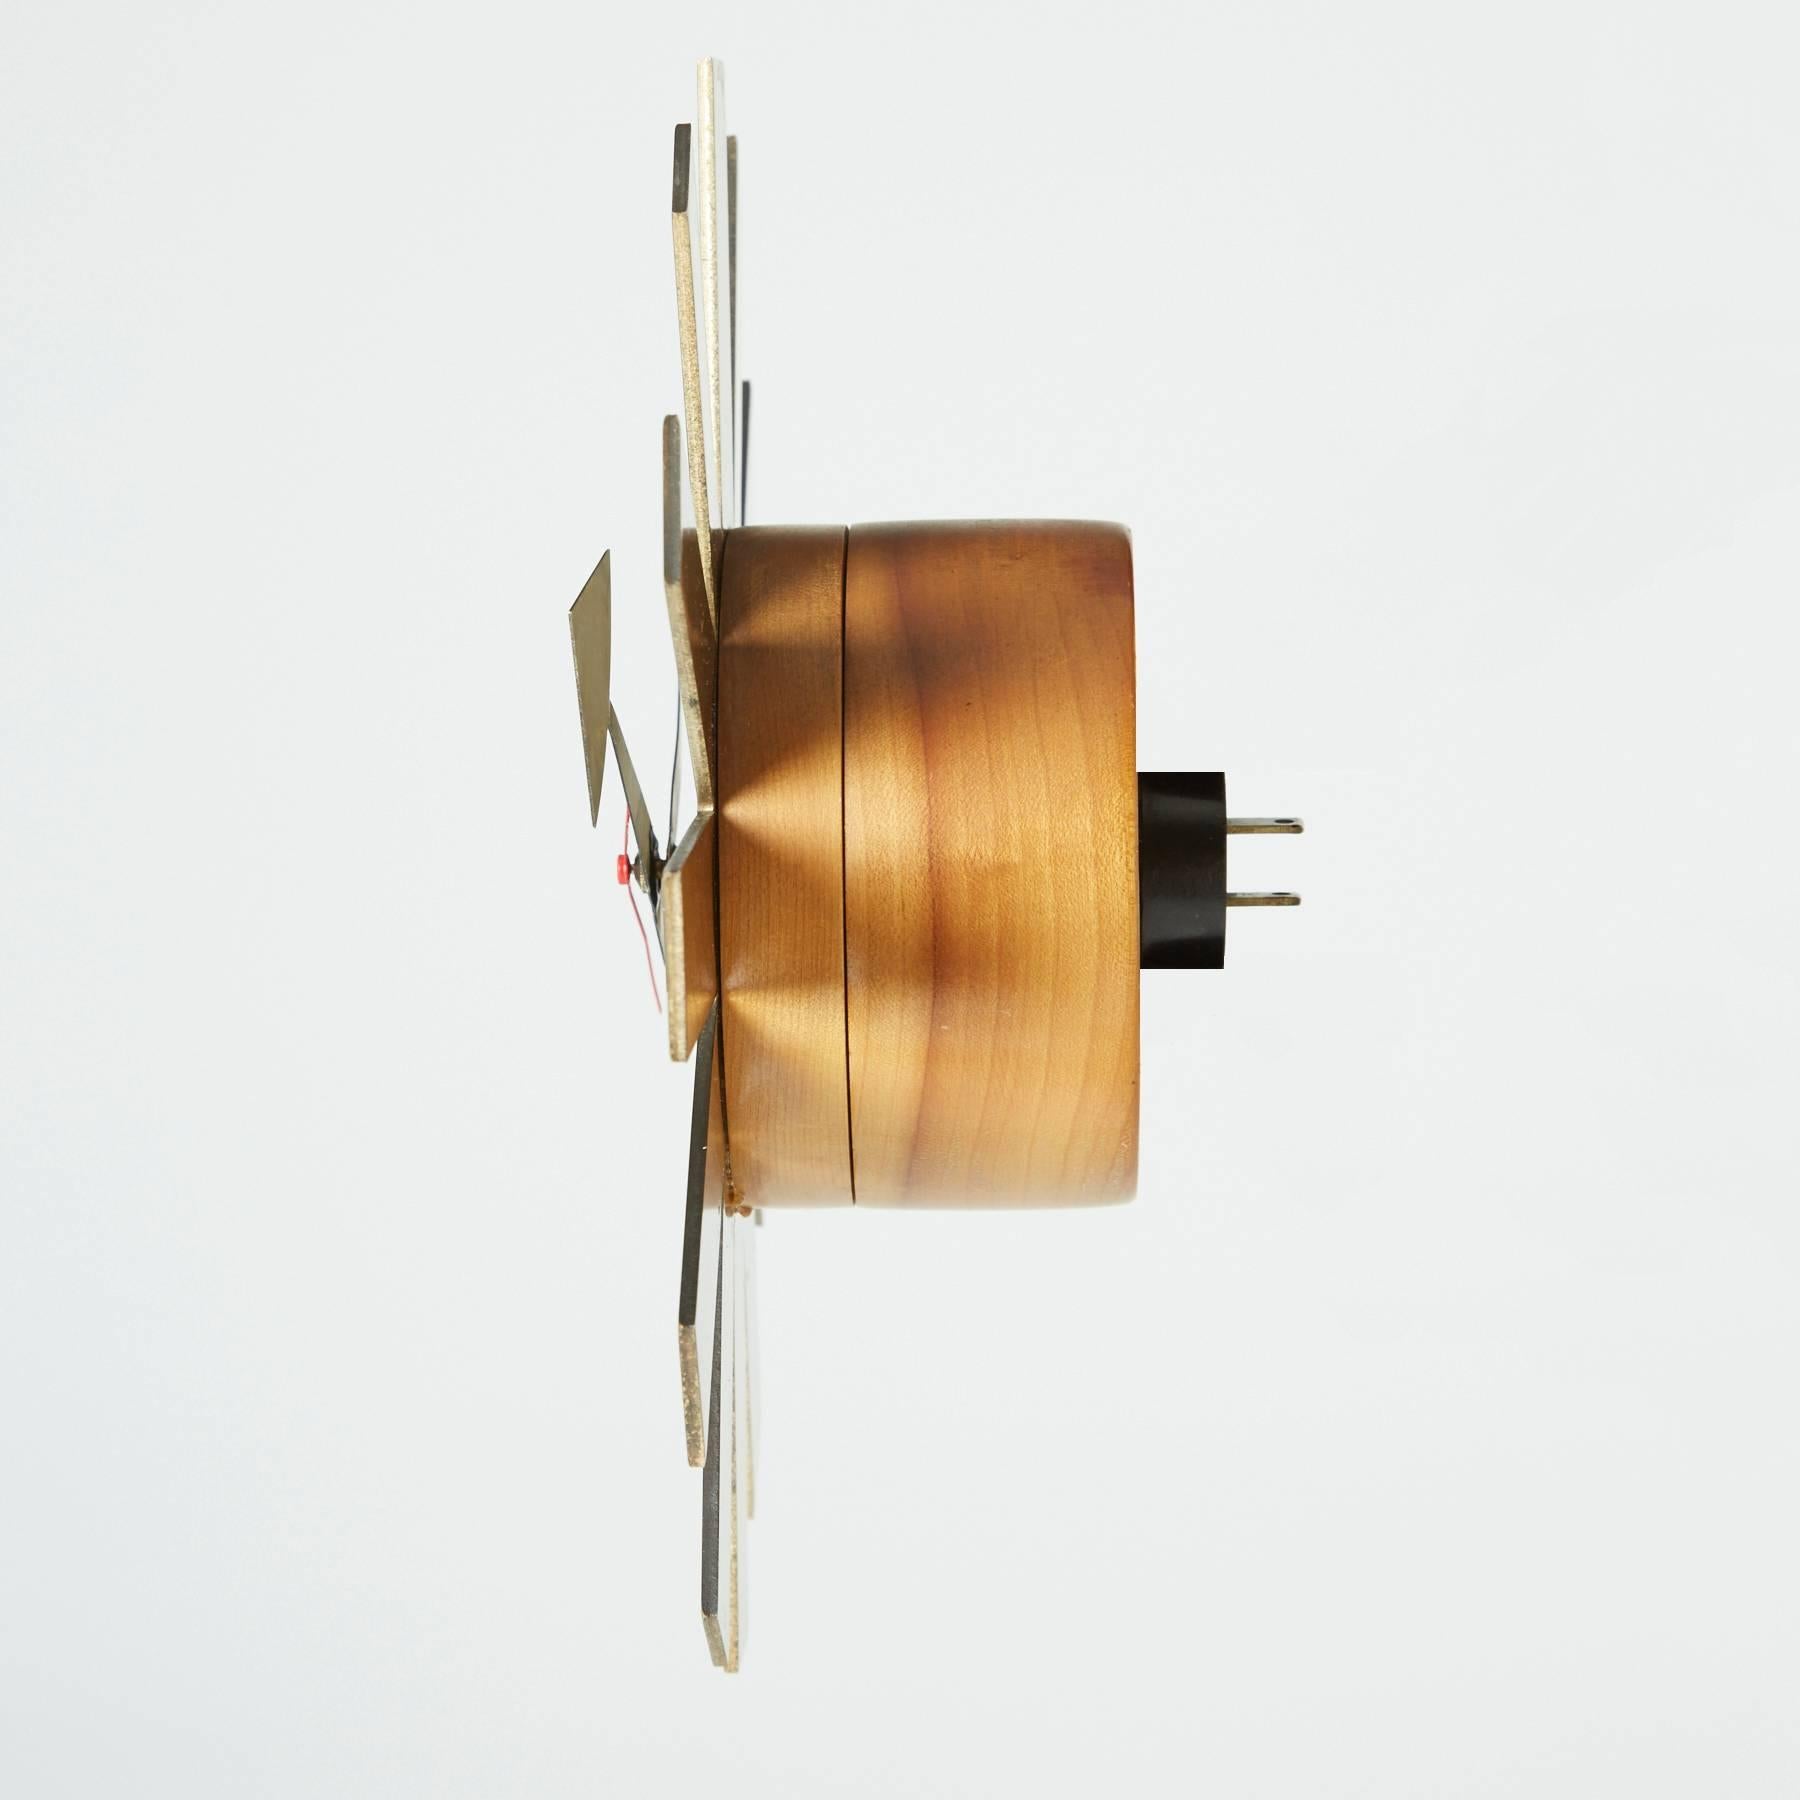 American Asterisk Clock by George Nelson, circa 1953